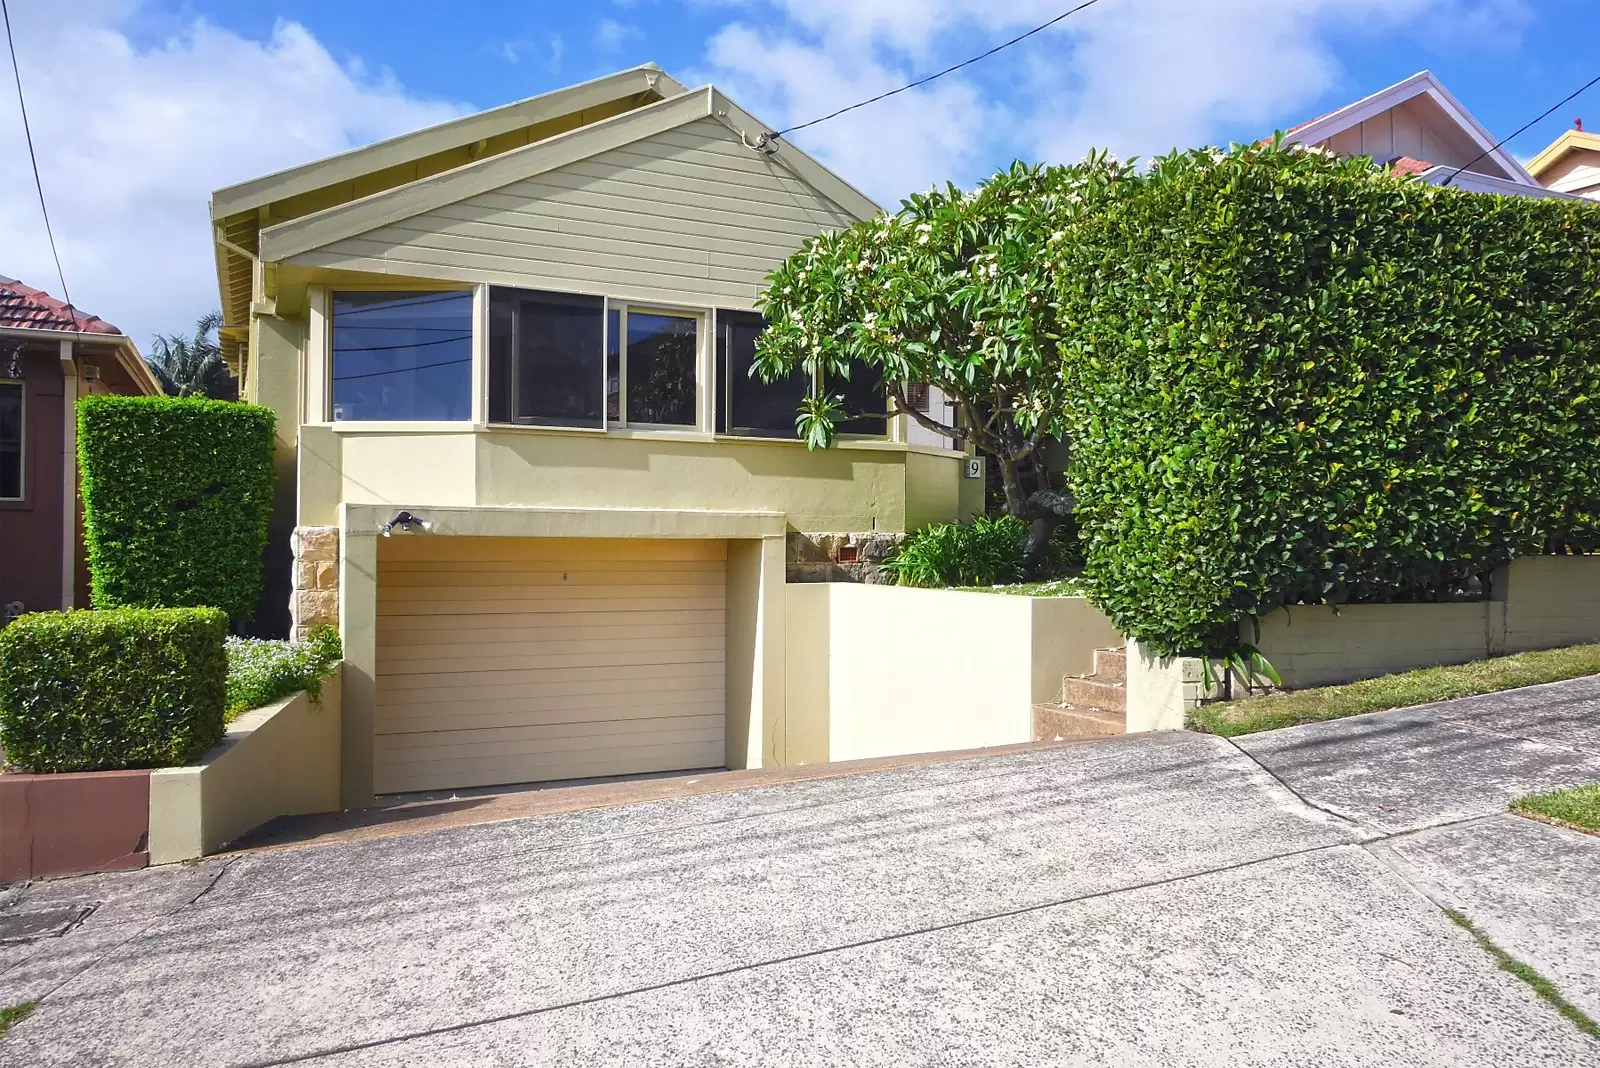 Photo #11: 9 Clarendon Street, Vaucluse - Sold by Sydney Sotheby's International Realty